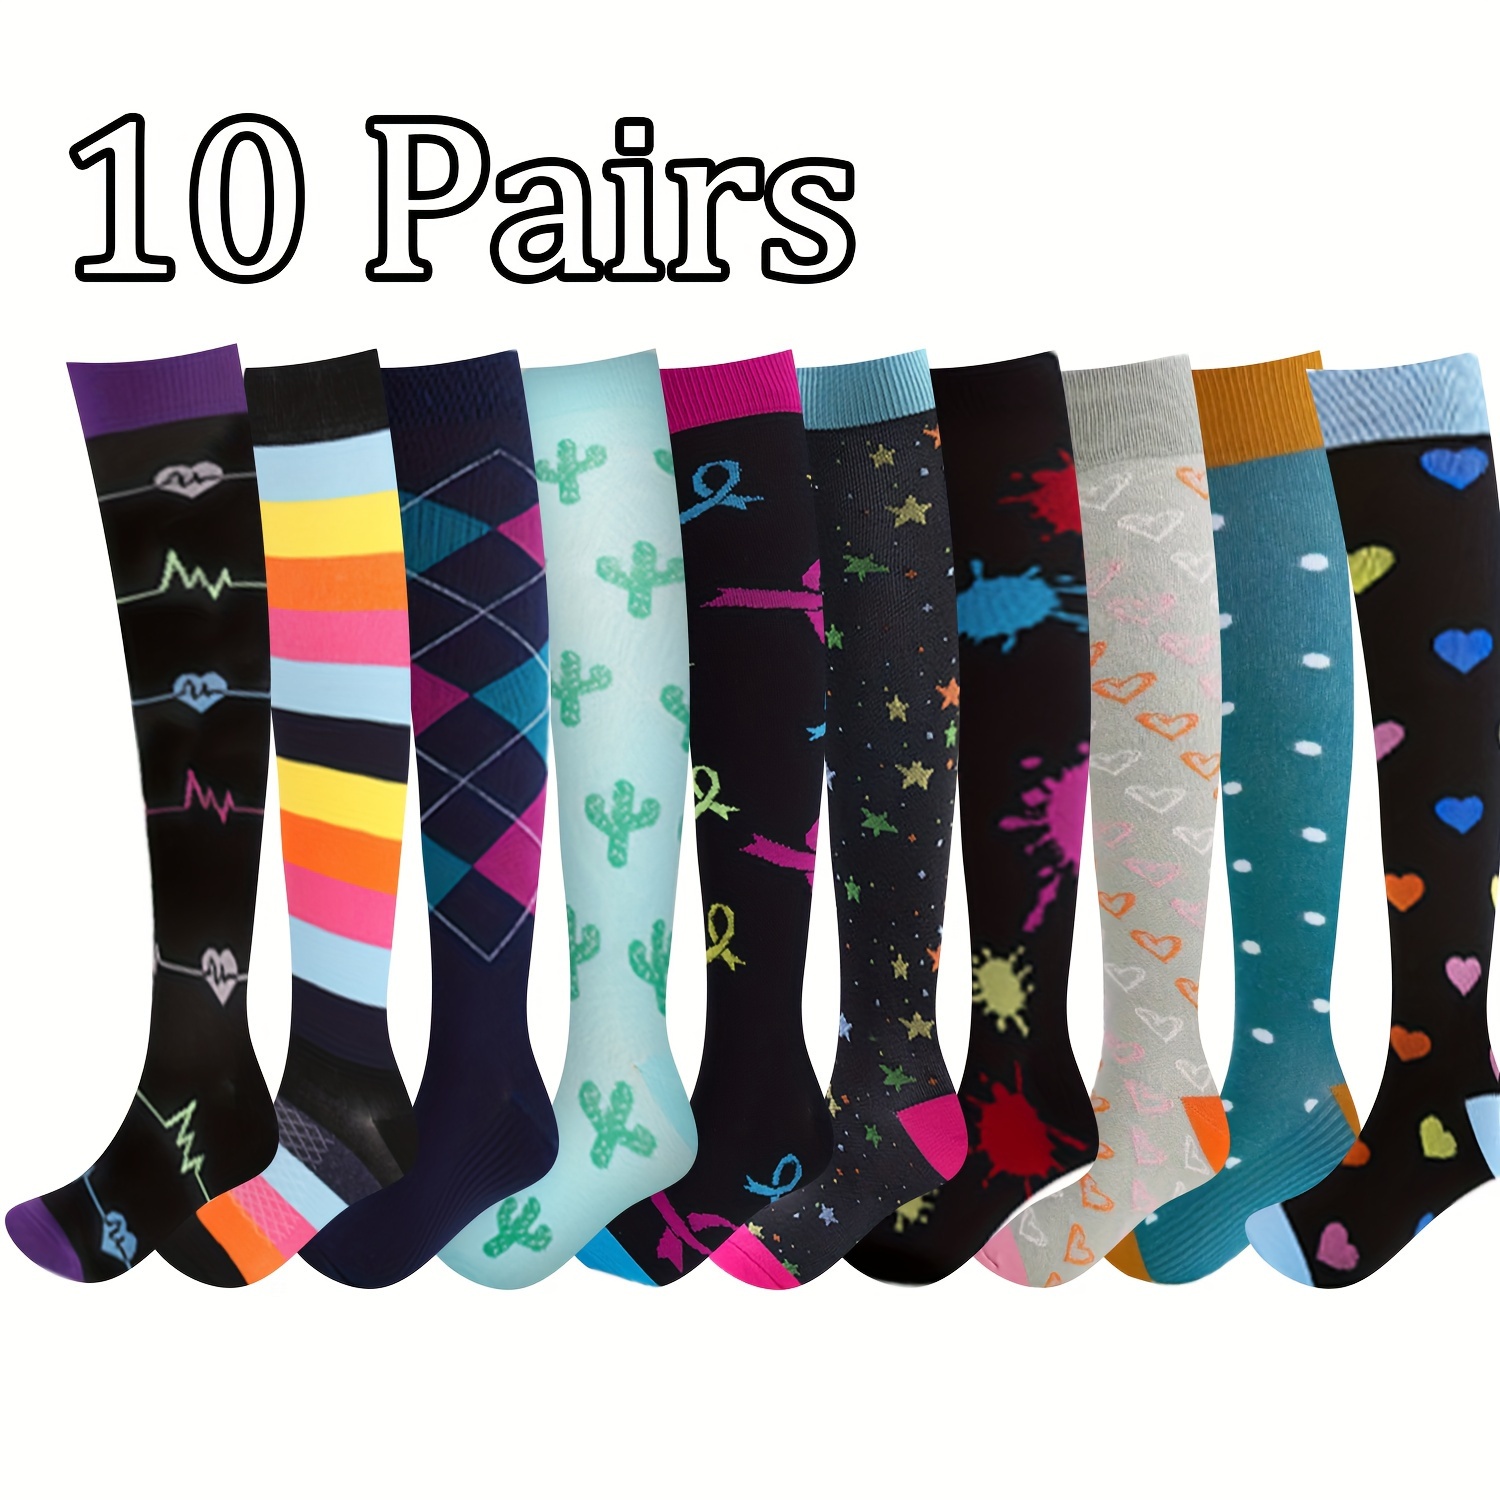 

10 Pairs Of Unisex Random Pattern Compression Socks, Knee High Stocking For Athletic Cycling Running Football Hiking Driving Travel